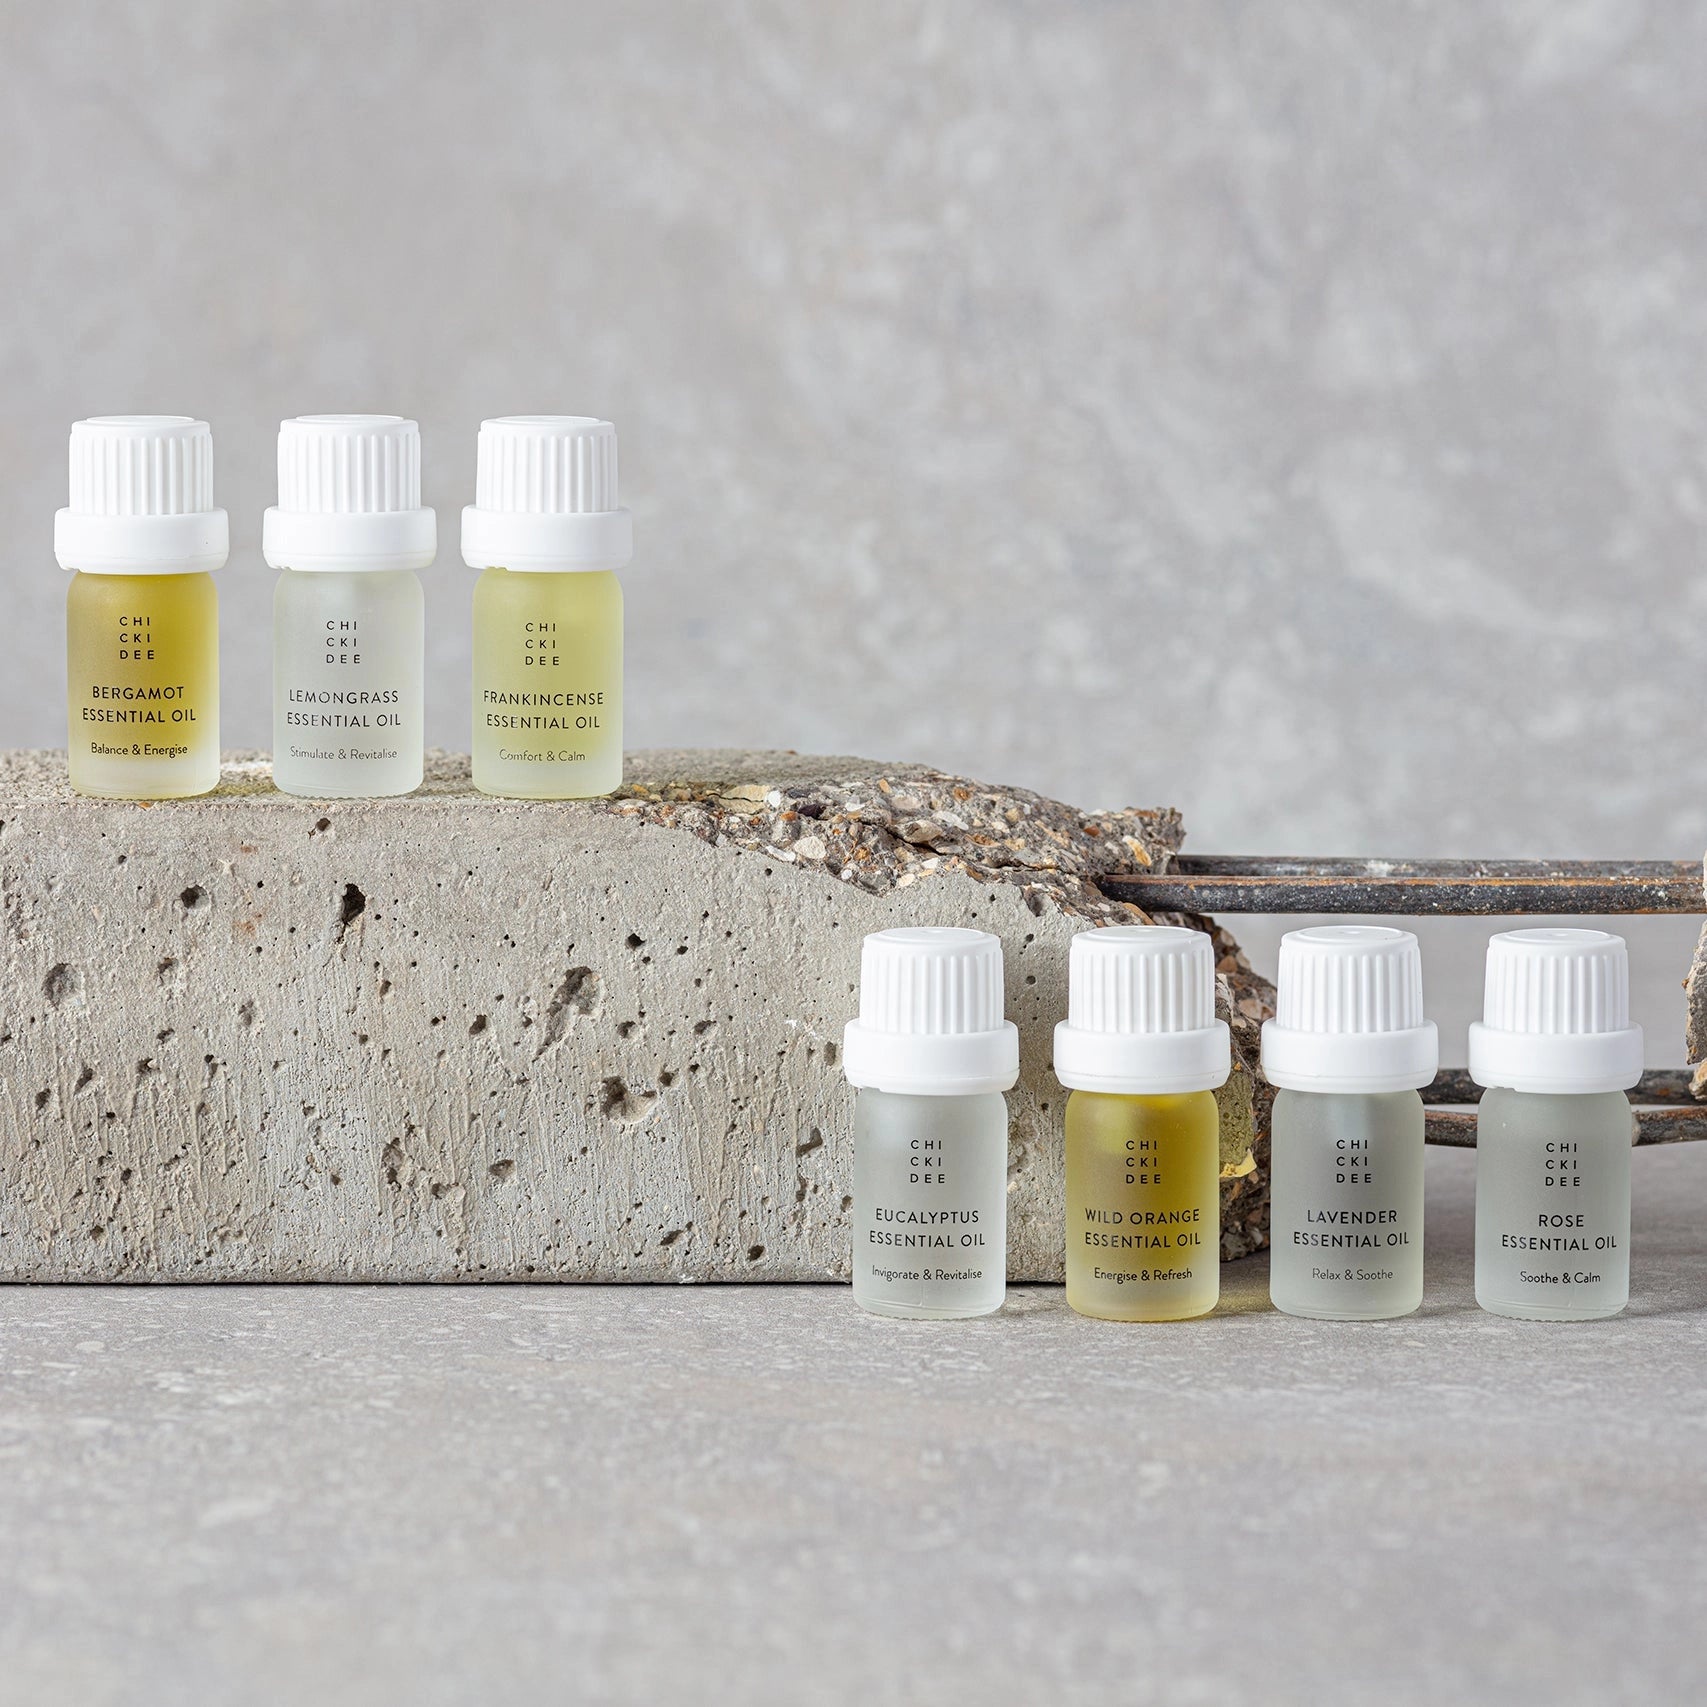 7 bottles filled with essential oils in different compositions